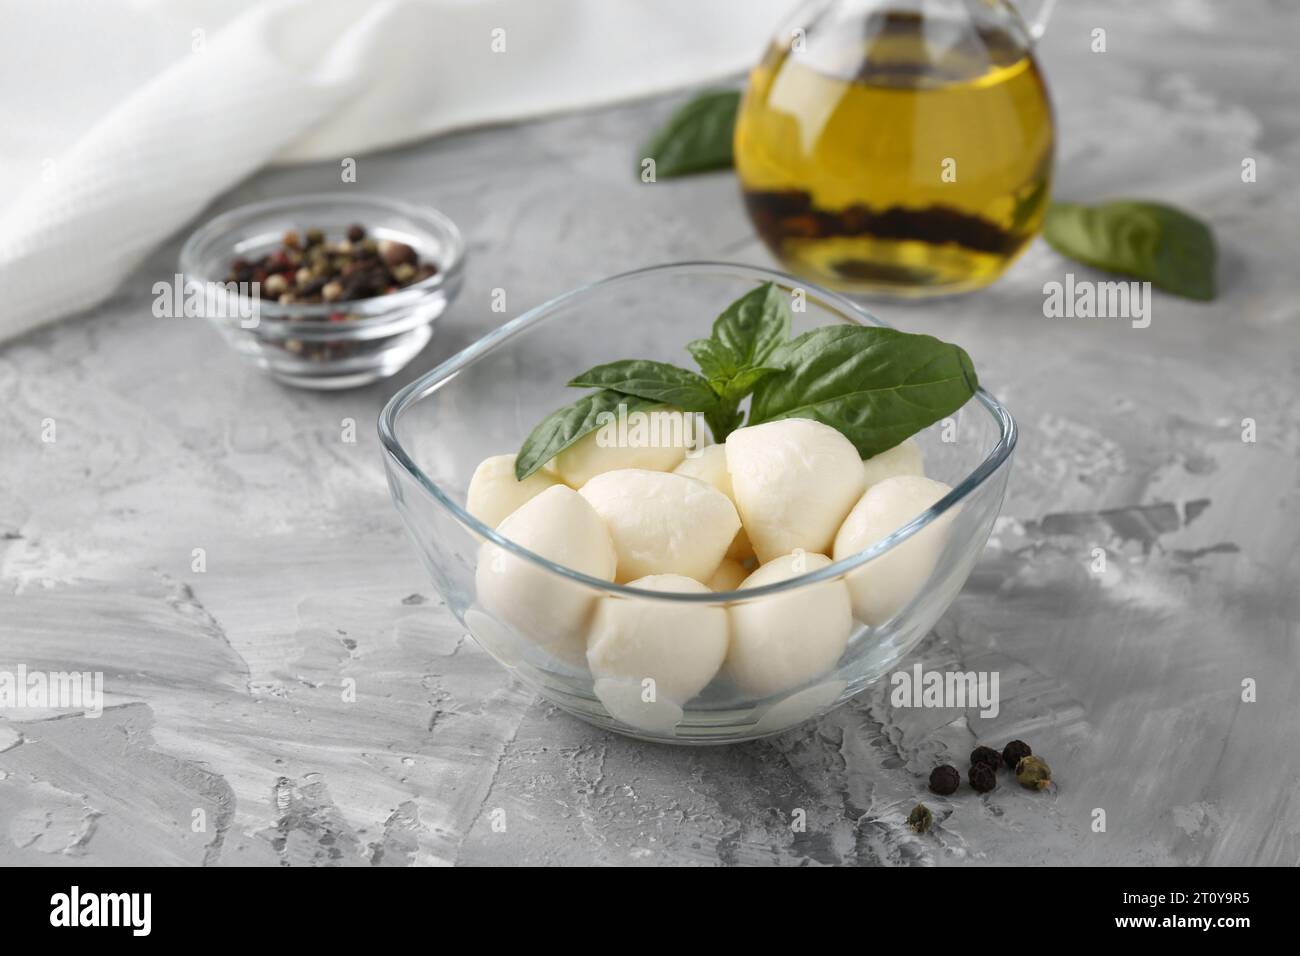 Tasty mozarella balls, basil leaves and spices on grey textured table Stock Photo